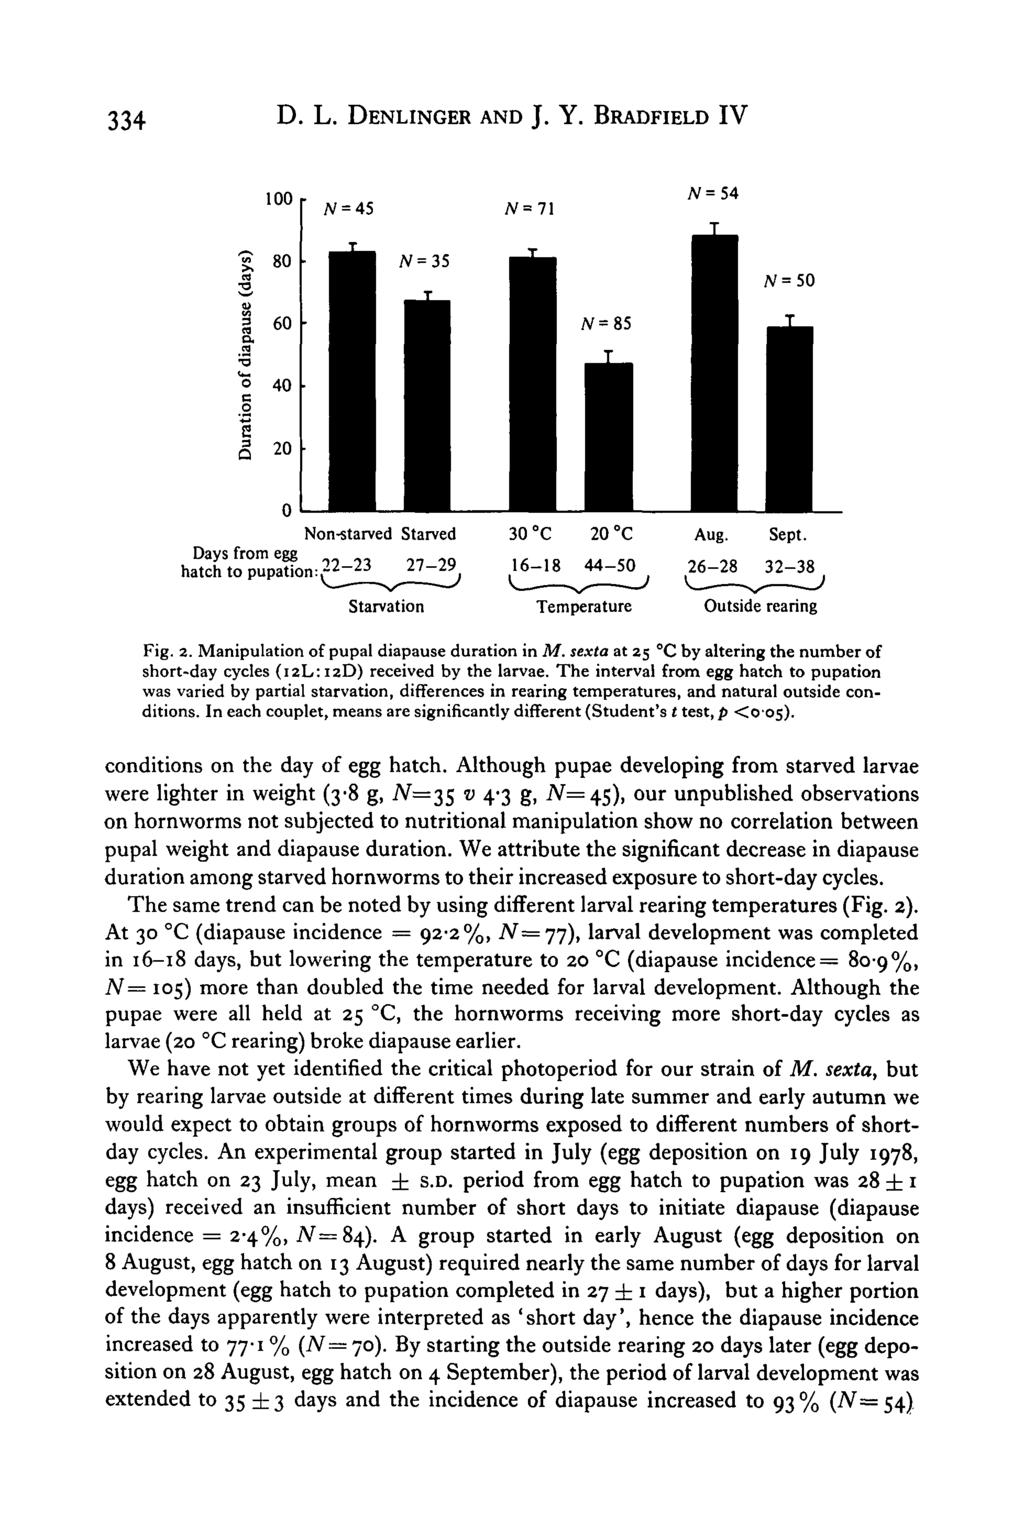 334 D. L. DENLINGER AND J. Y. BRADFIELD IV a Non-starved Starved Starvation 30 C 20 C 16-^8 44-50 Temperature Aug. Sept. 26-28 32-38 Outside rearing Fig. 2. Manipulation of pupal diapause duration in M.